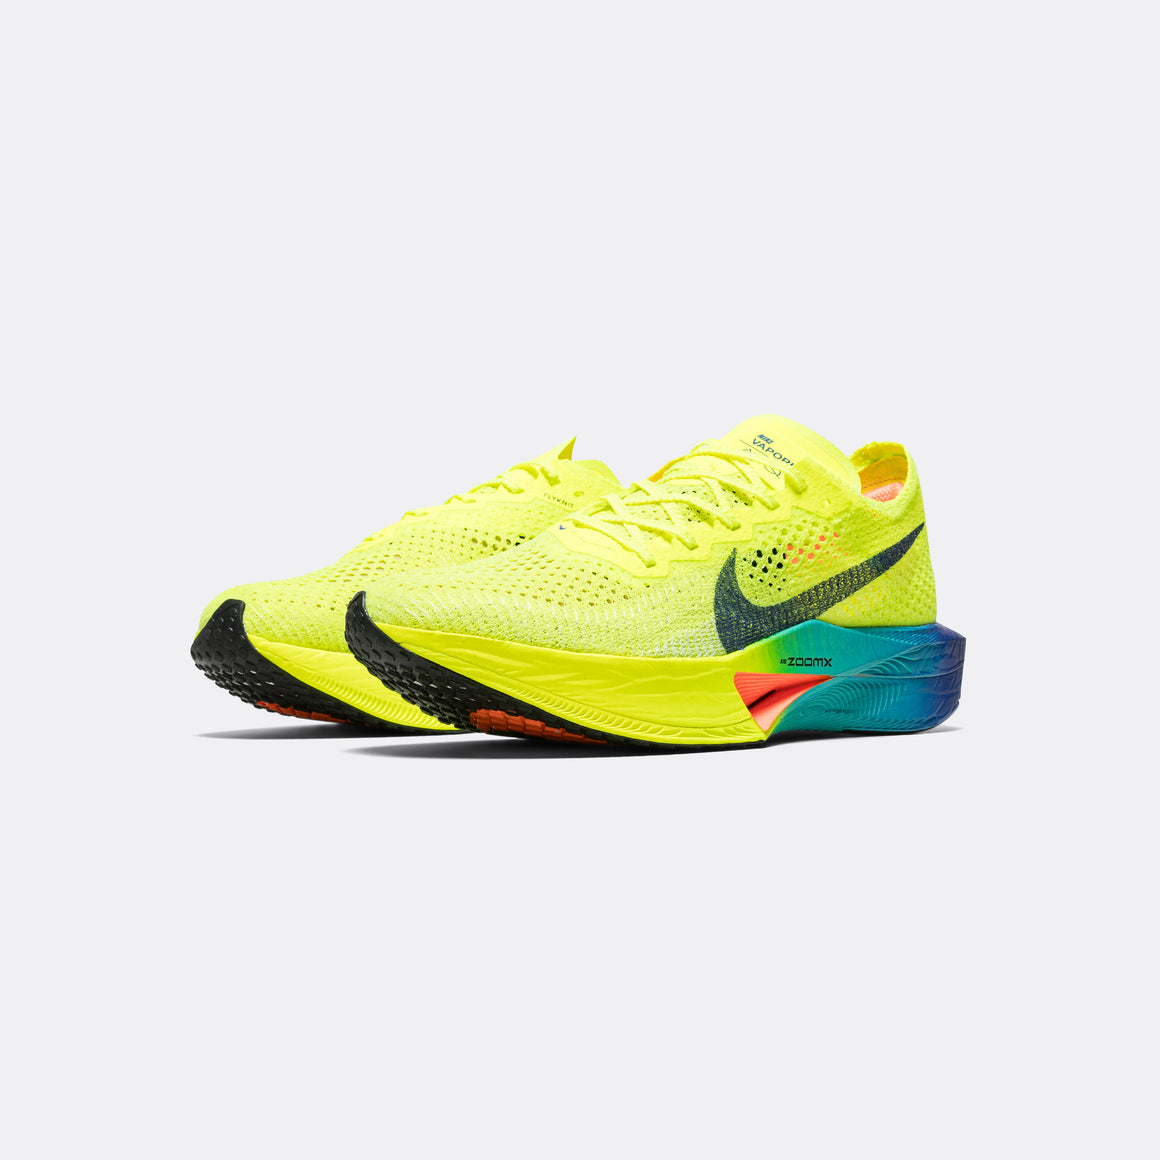 Nike - Mens ZoomX Vaporfly Next% 3 - Volt/Black-Scream Green - Up There Athletics